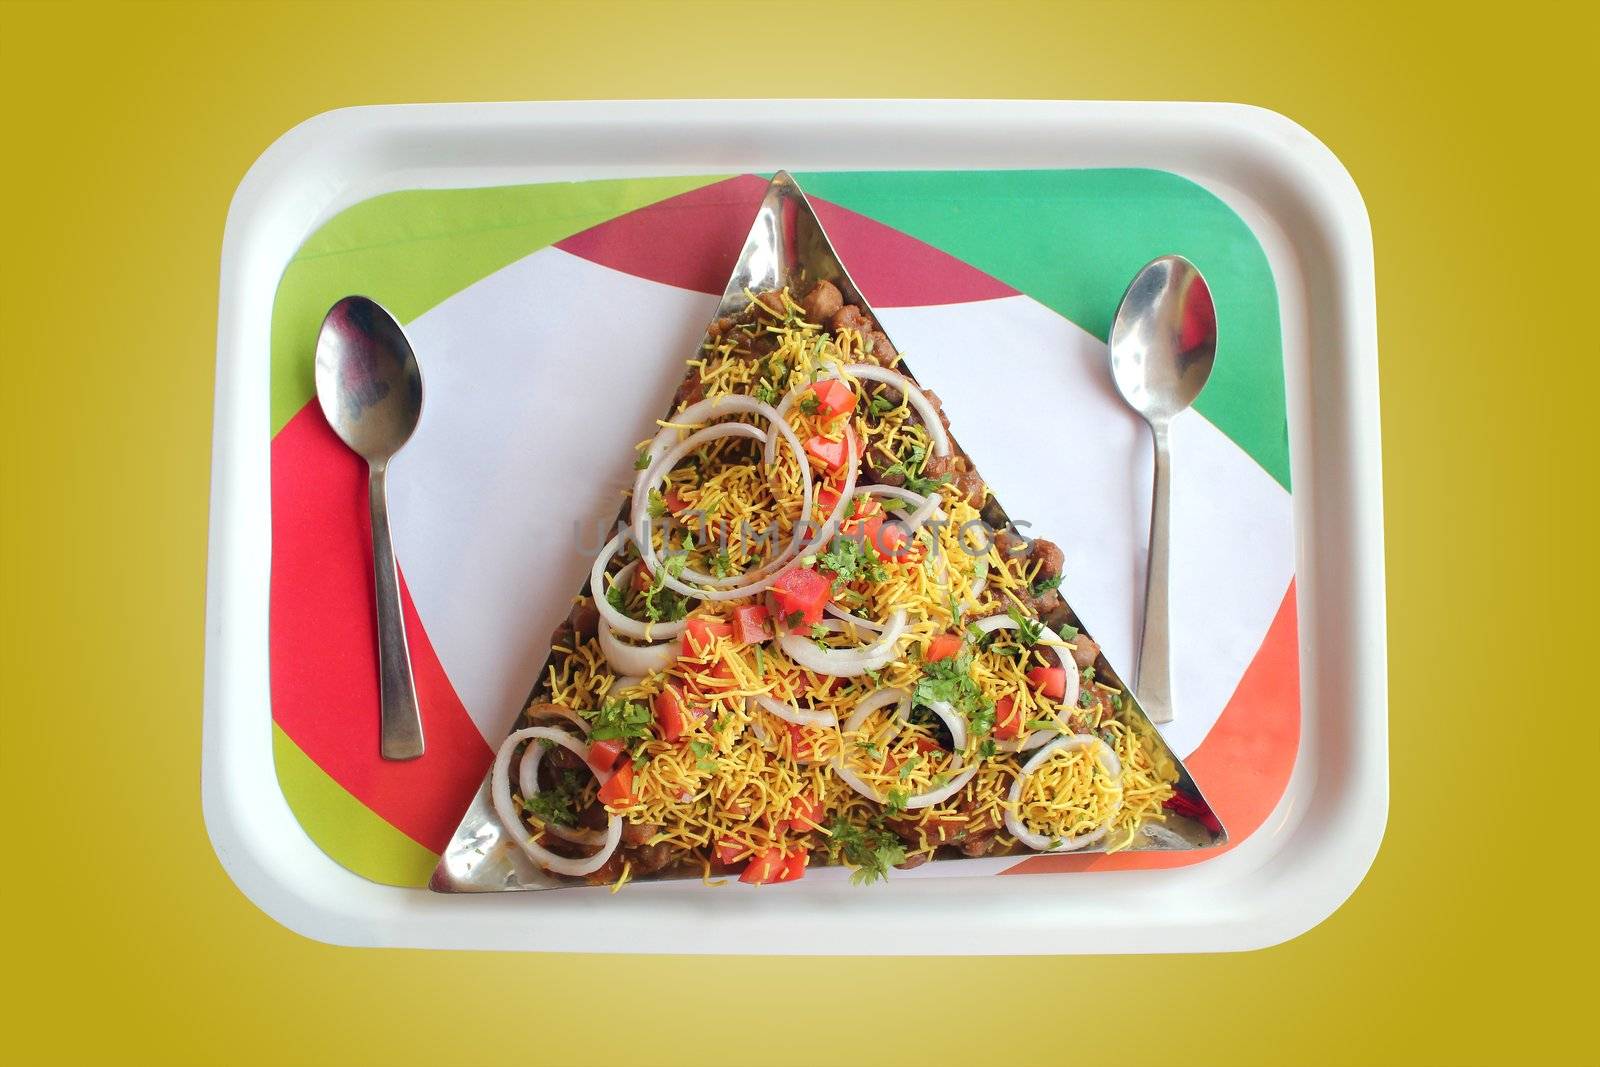 Indian chaat snack called masala puri or sev puri made with tangy sauce, fried bread, vegetables and fruits and sev. Image with clipping mask